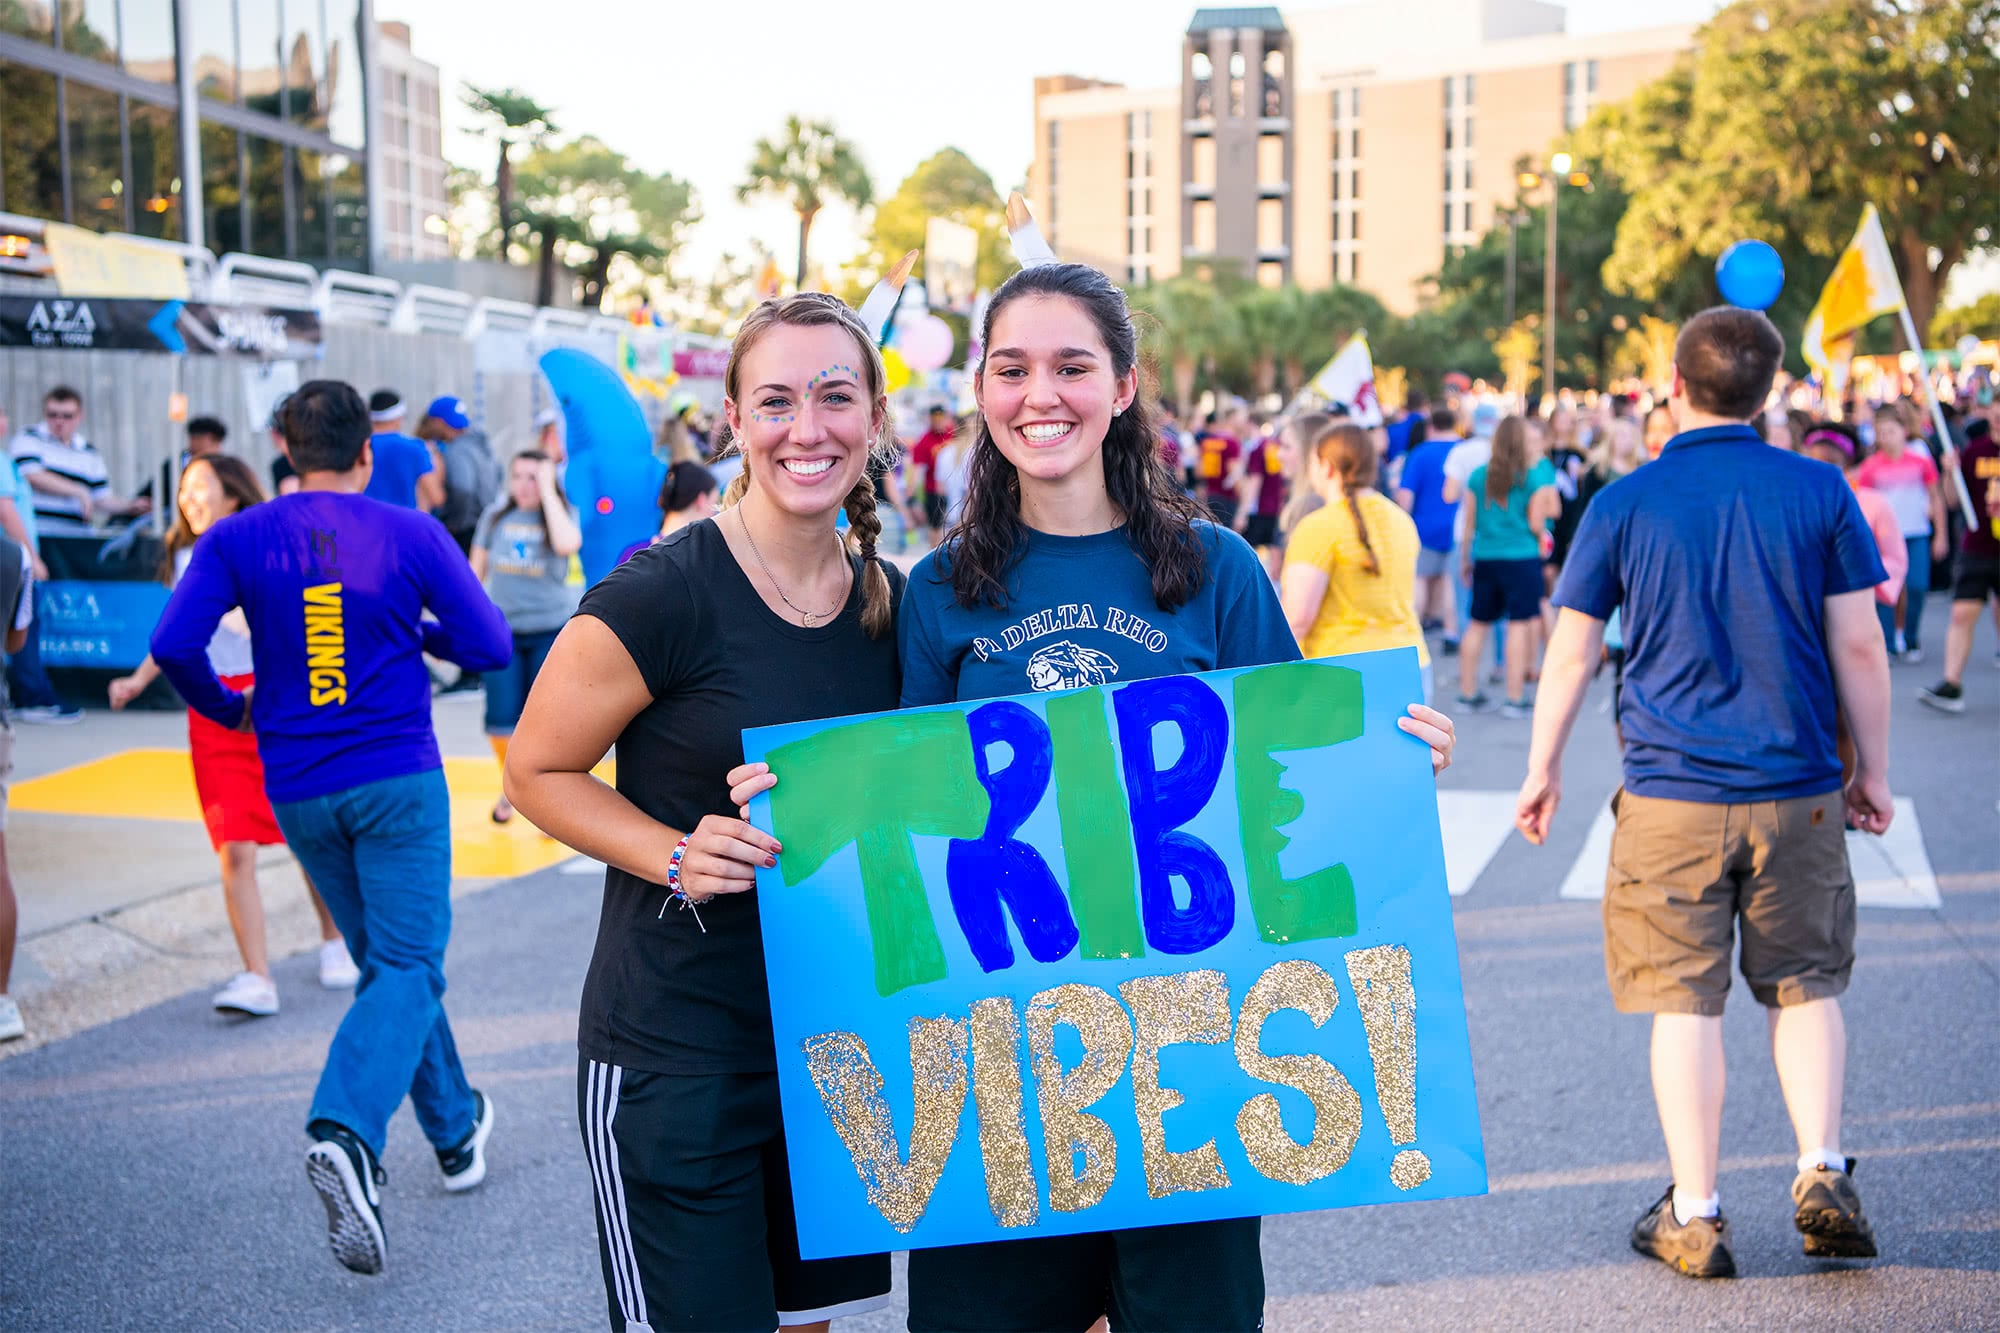 Two members of the Aztec collegian hold a sign that says "tribe vibes"